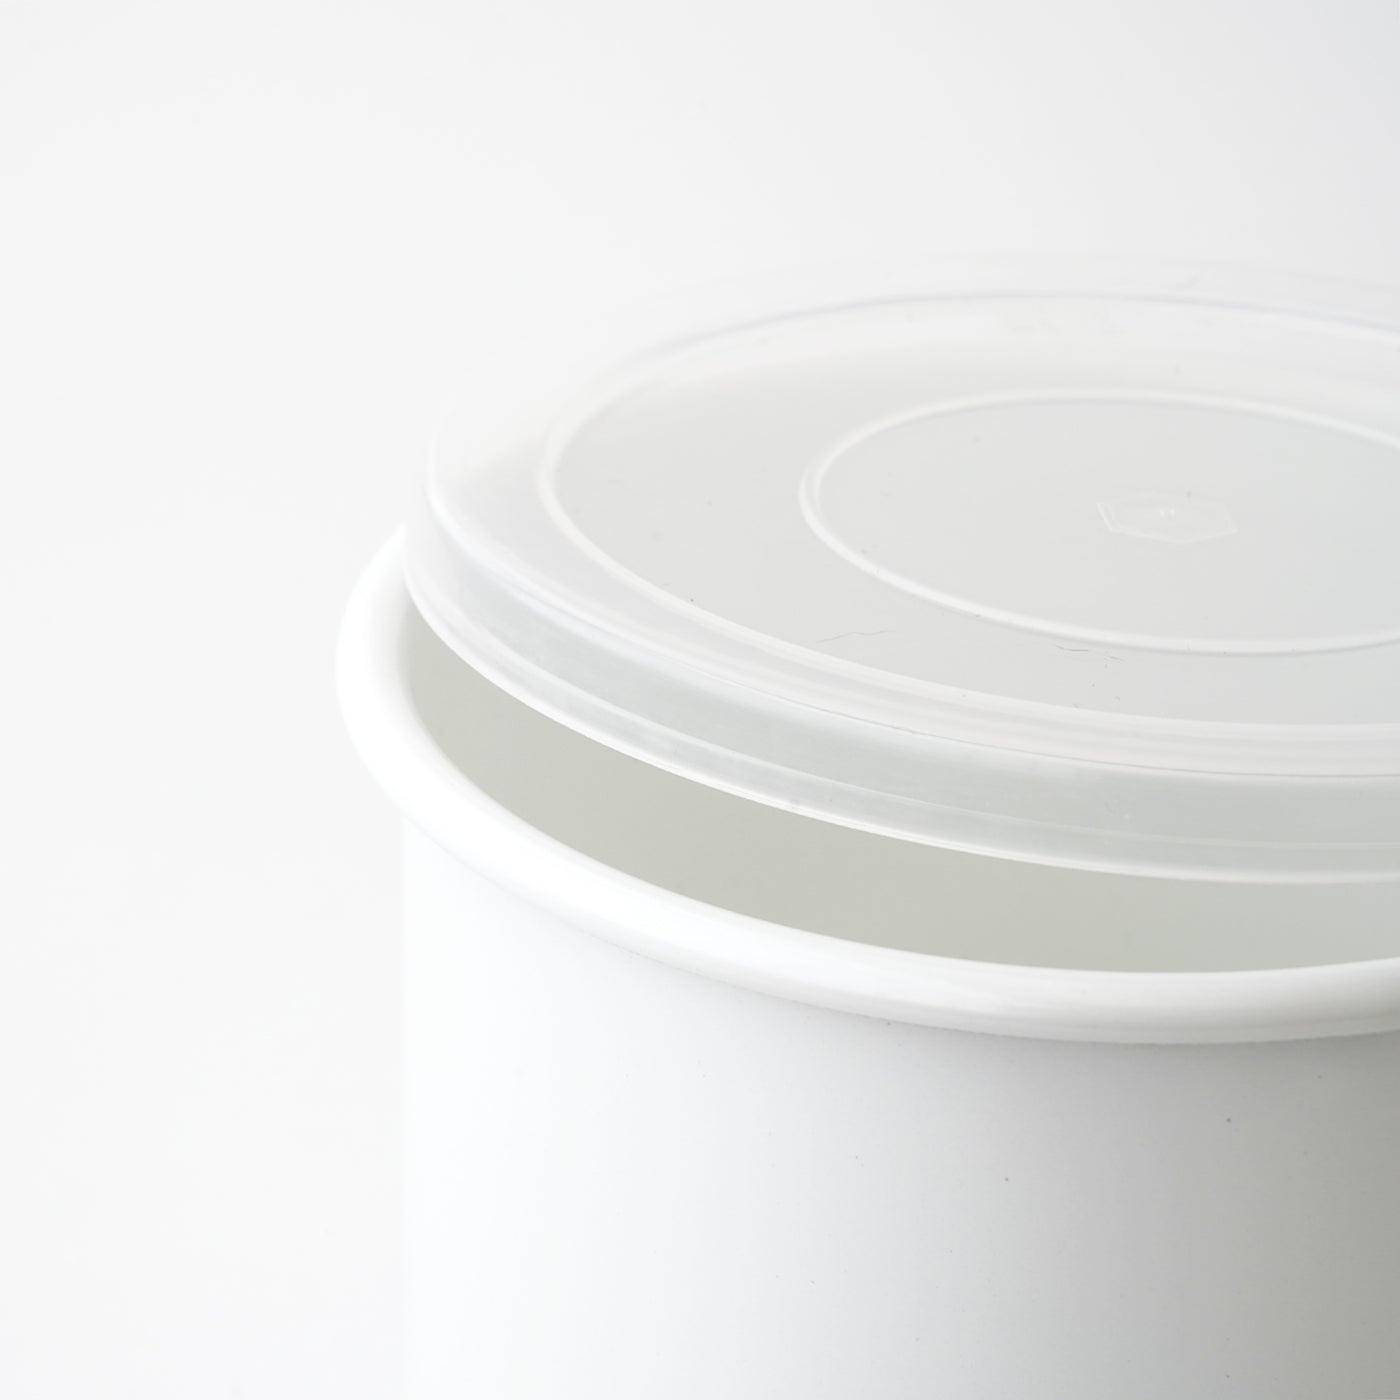 NODA HORO / ENAMEL CONTAINERS WITH LID AND HANDLE